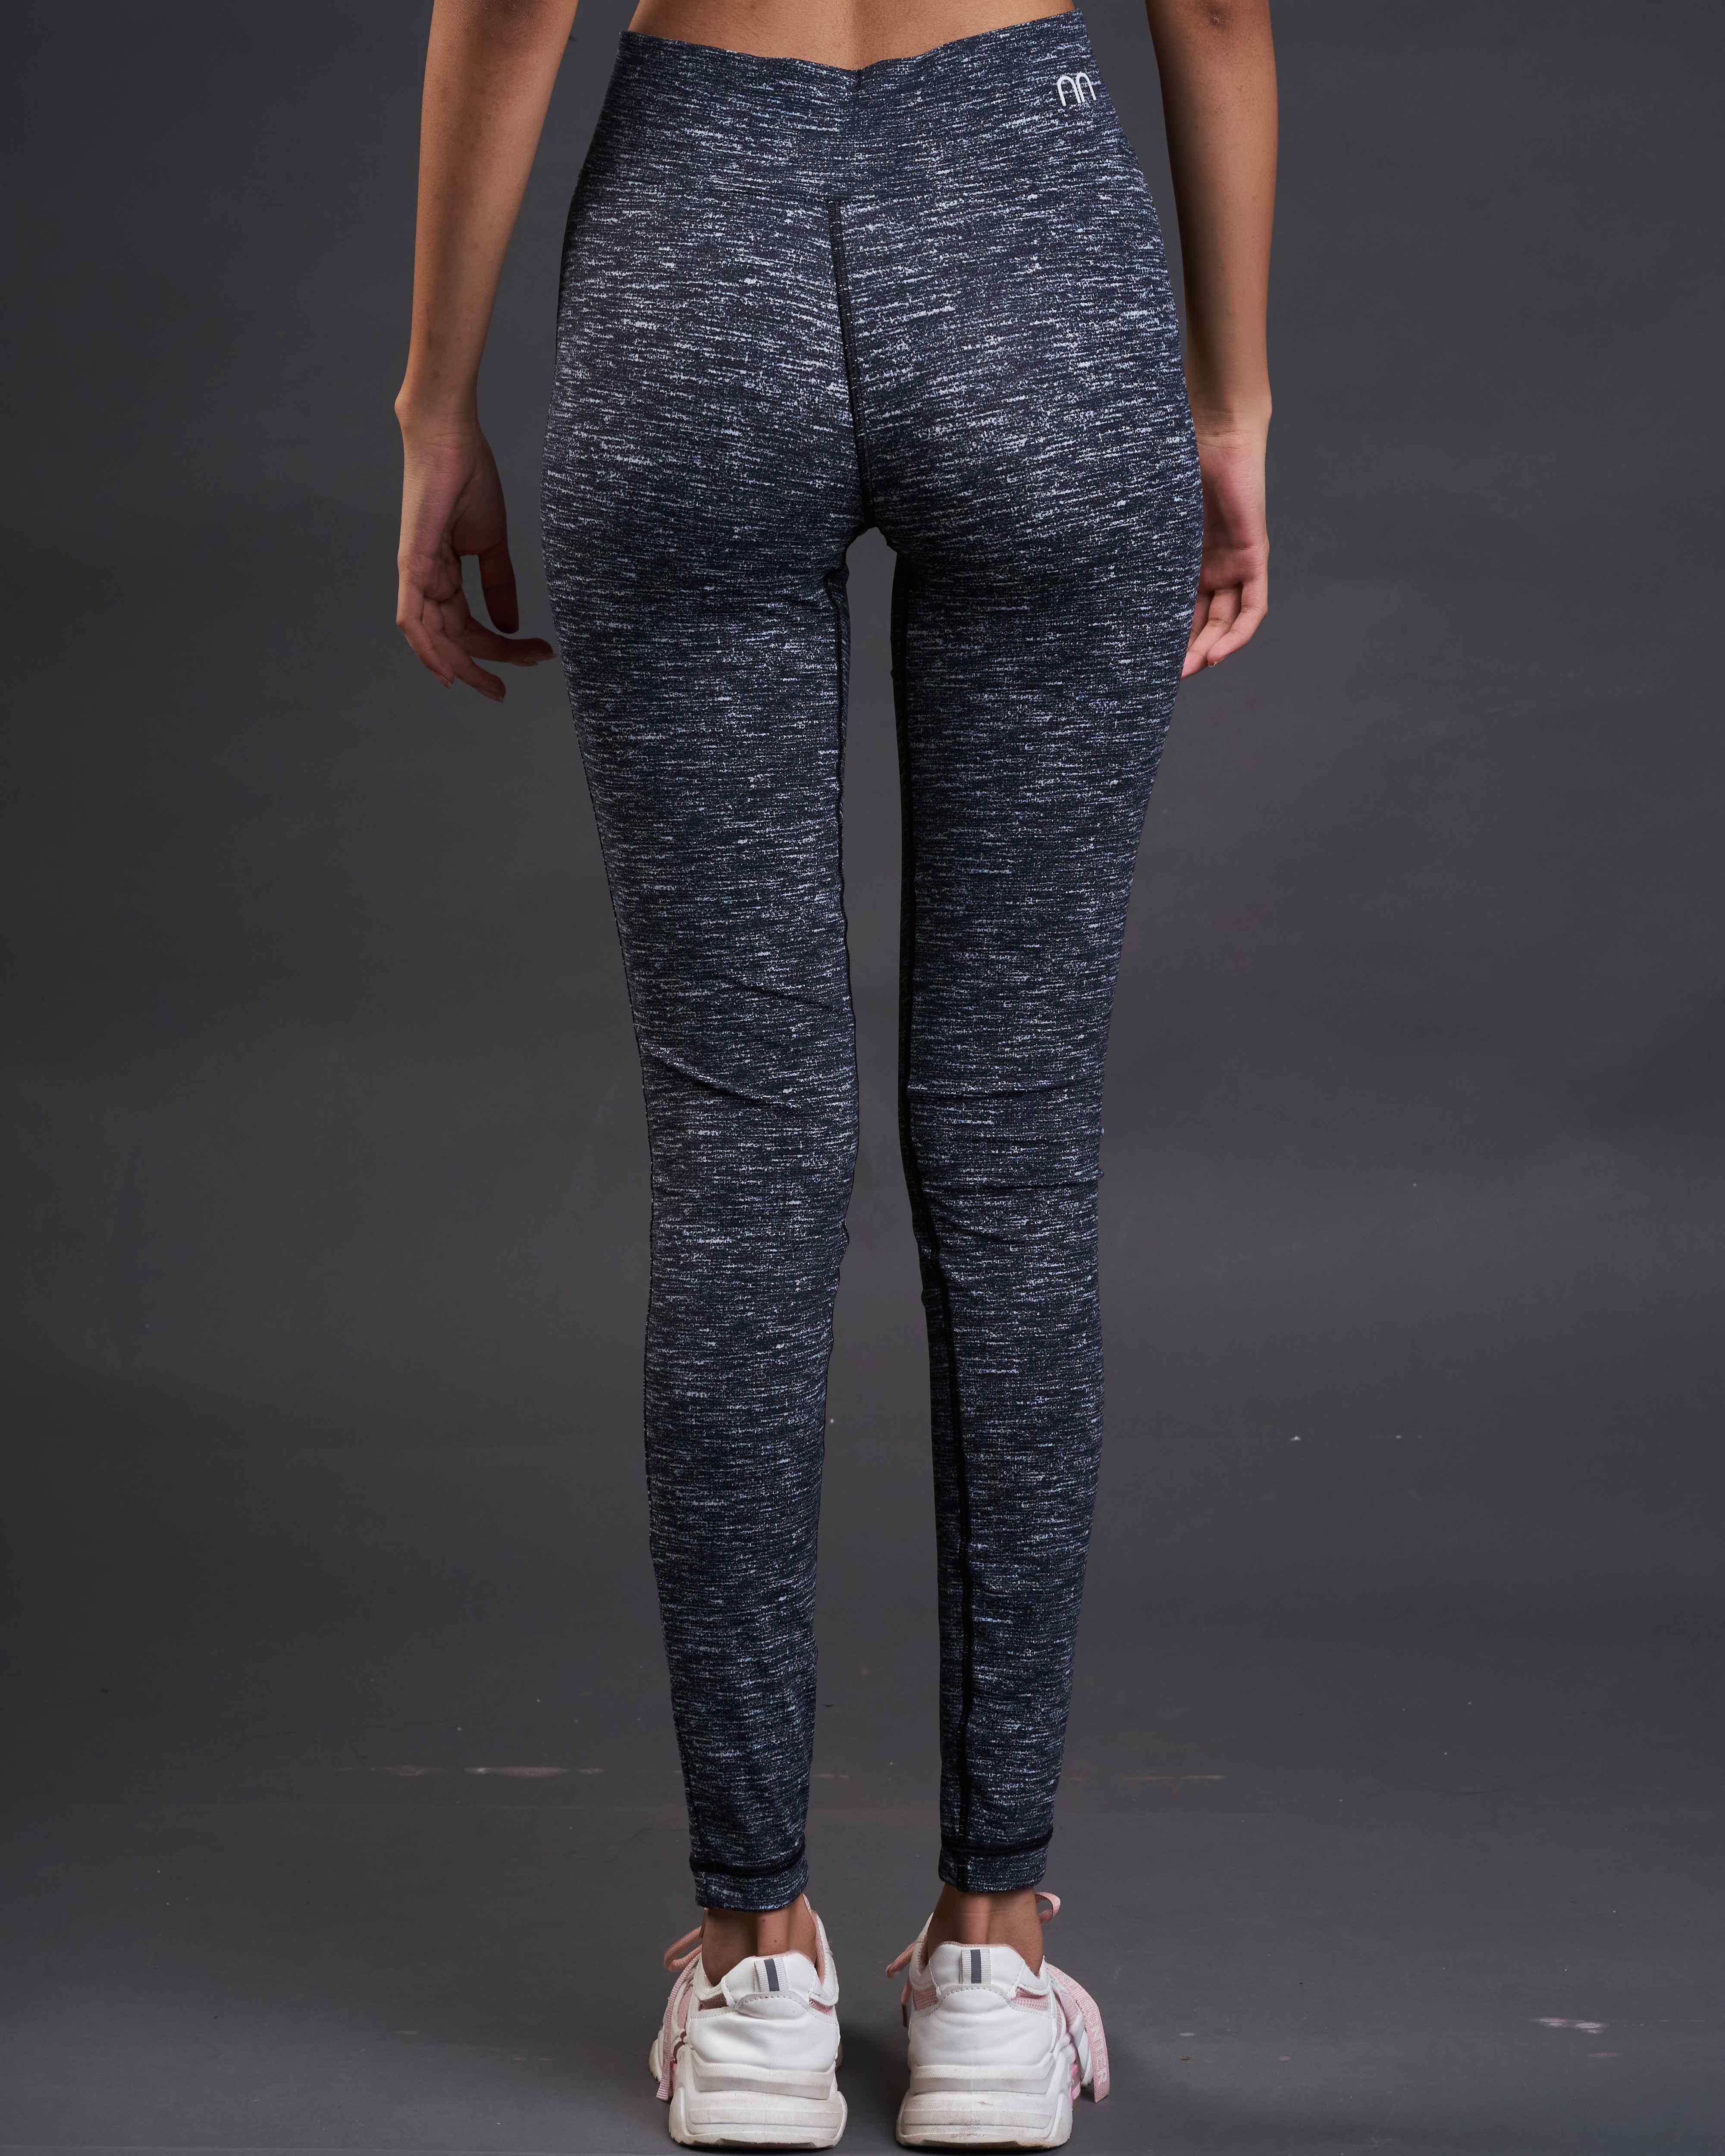 Runn Active Wear Printed Athleisure Fit-Charcoal